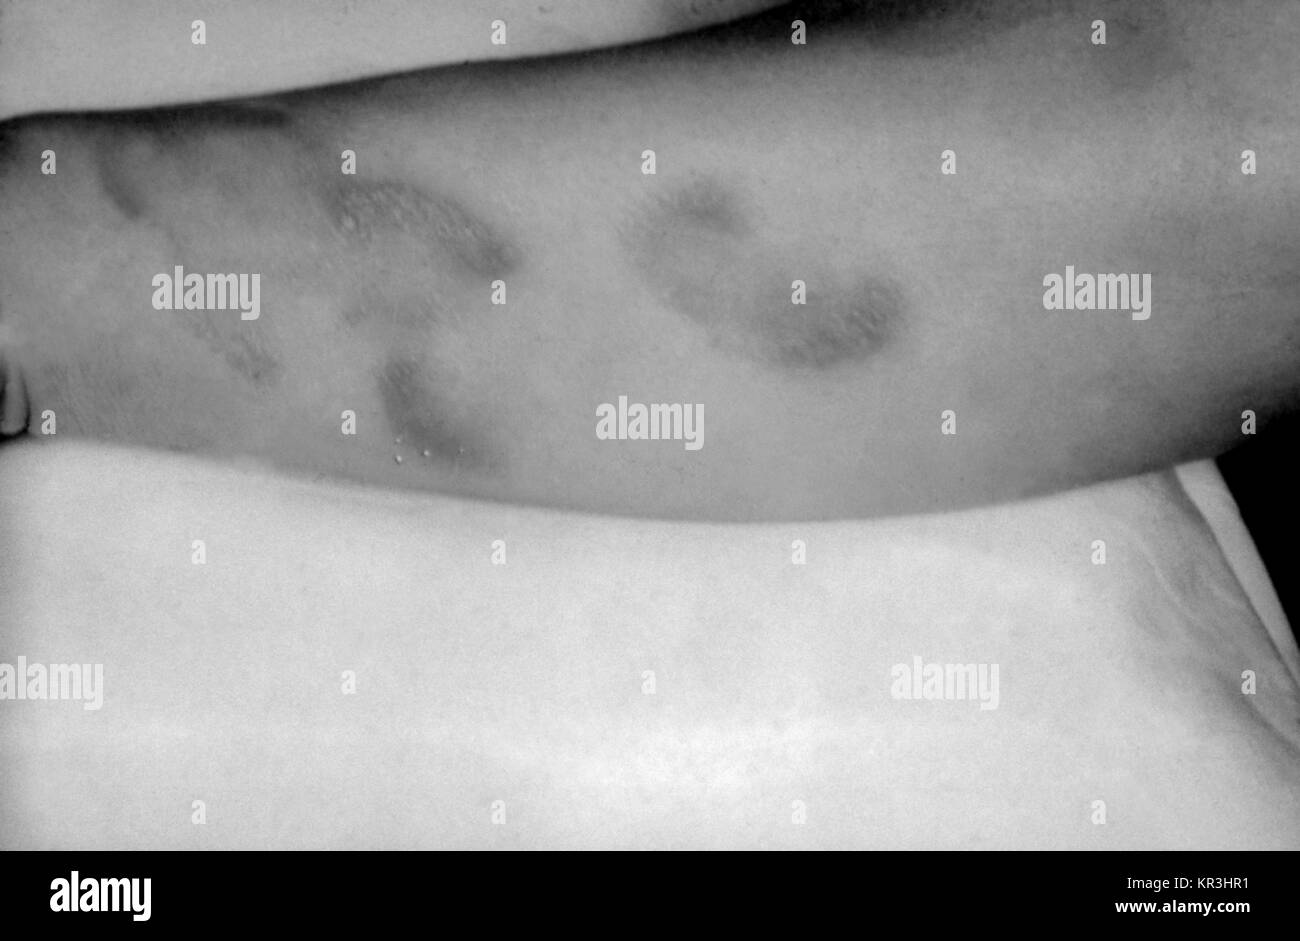 A photograph of a patient with tertiary syphilis depicting gummatous lesions on the volar surface of the right arm. Tertiary syphilis occurs many years after initial untreated primary syphilis, 1971. Gummas, or internal tissue granulation, form and result in severe damage to the skin, bone, liver and other bodily organs, or regions. Image courtesy CDC/Susan Lindsley. Stock Photo